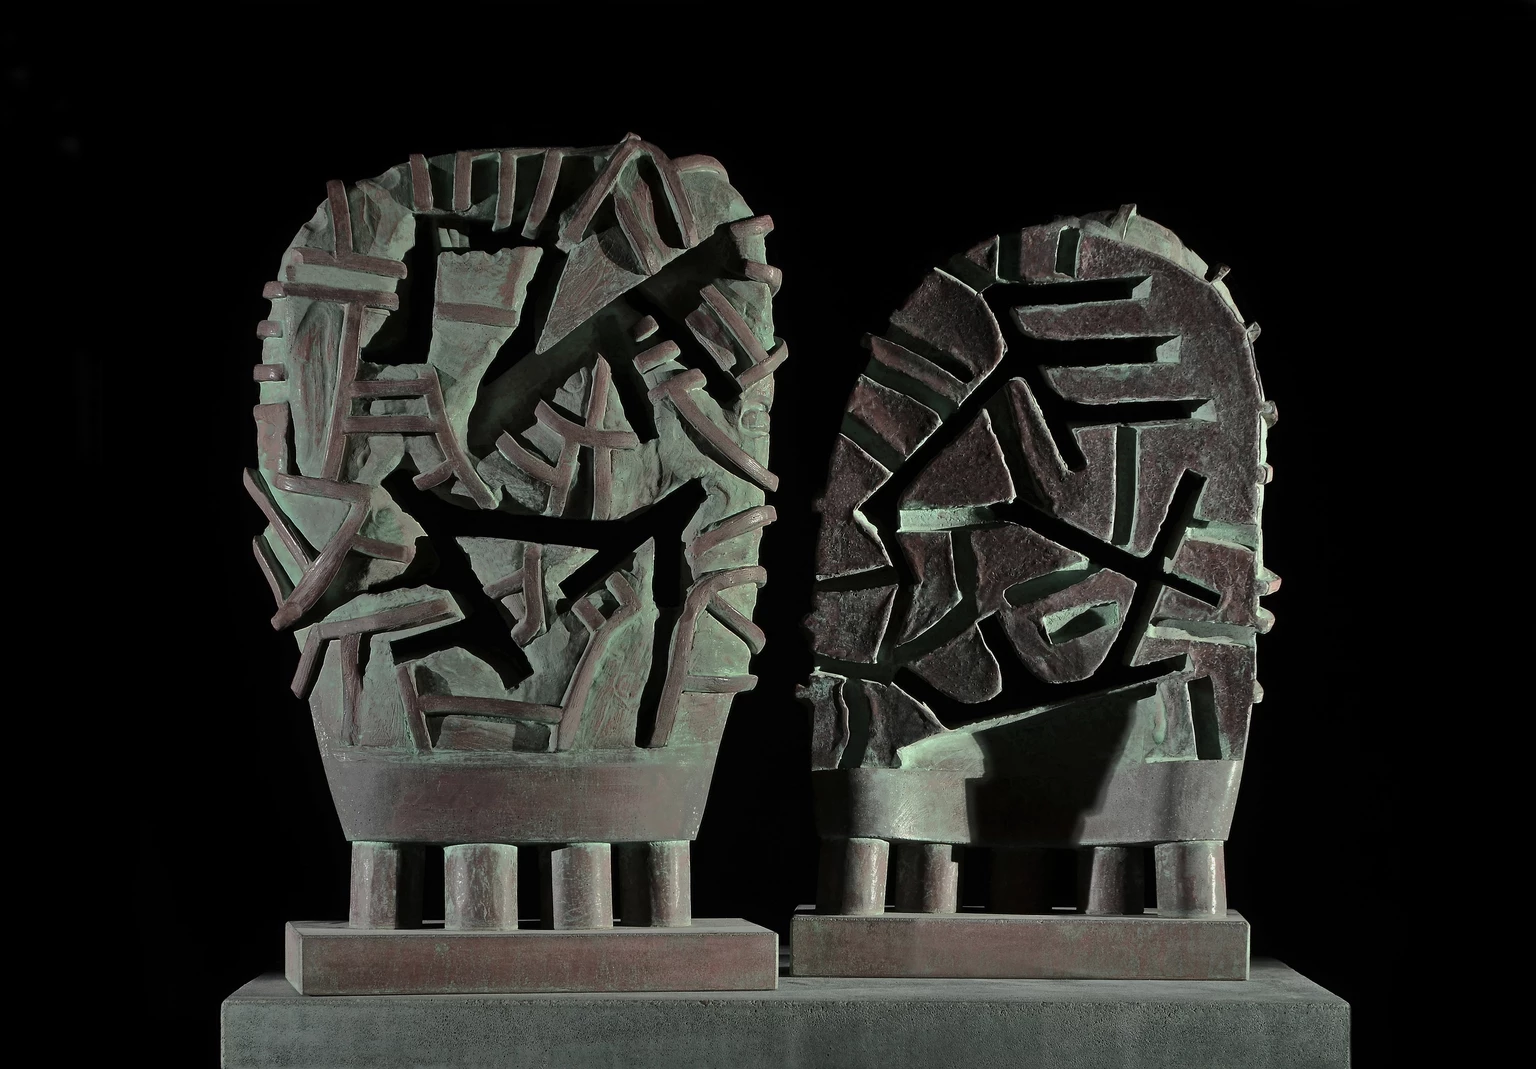 Paired mask, 2001 - colored and painted concrete, 60 x 32.5 x 14 cm, 56 x 32.5 x 14 cm